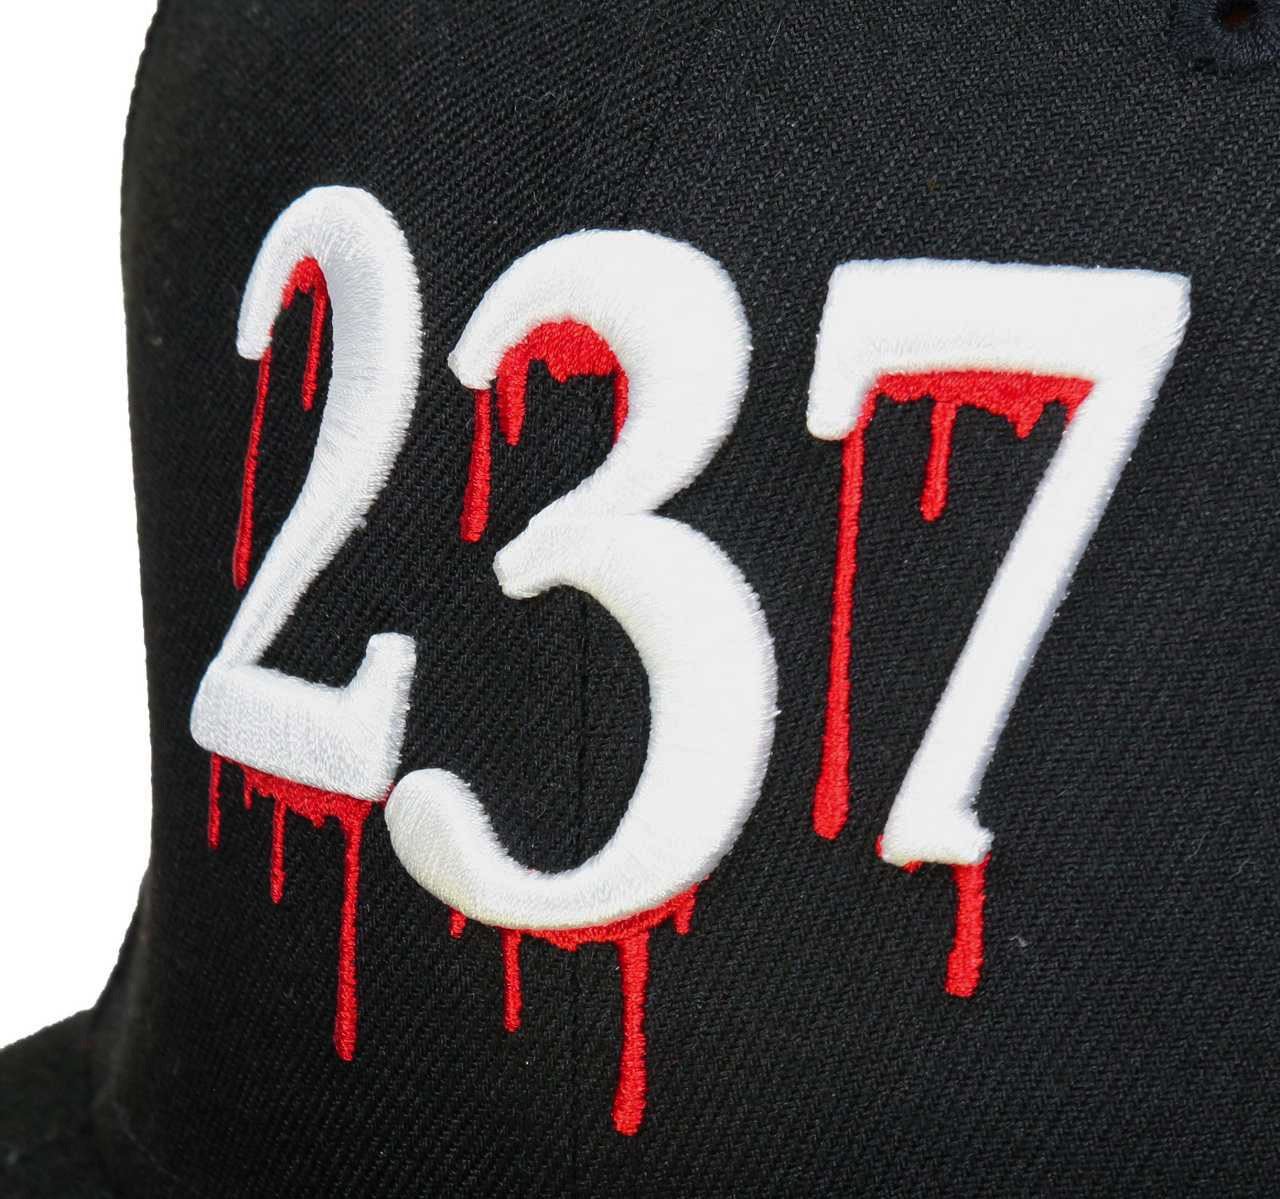 Room 237 The Shining Collection 59Fifty Basecap New Era 